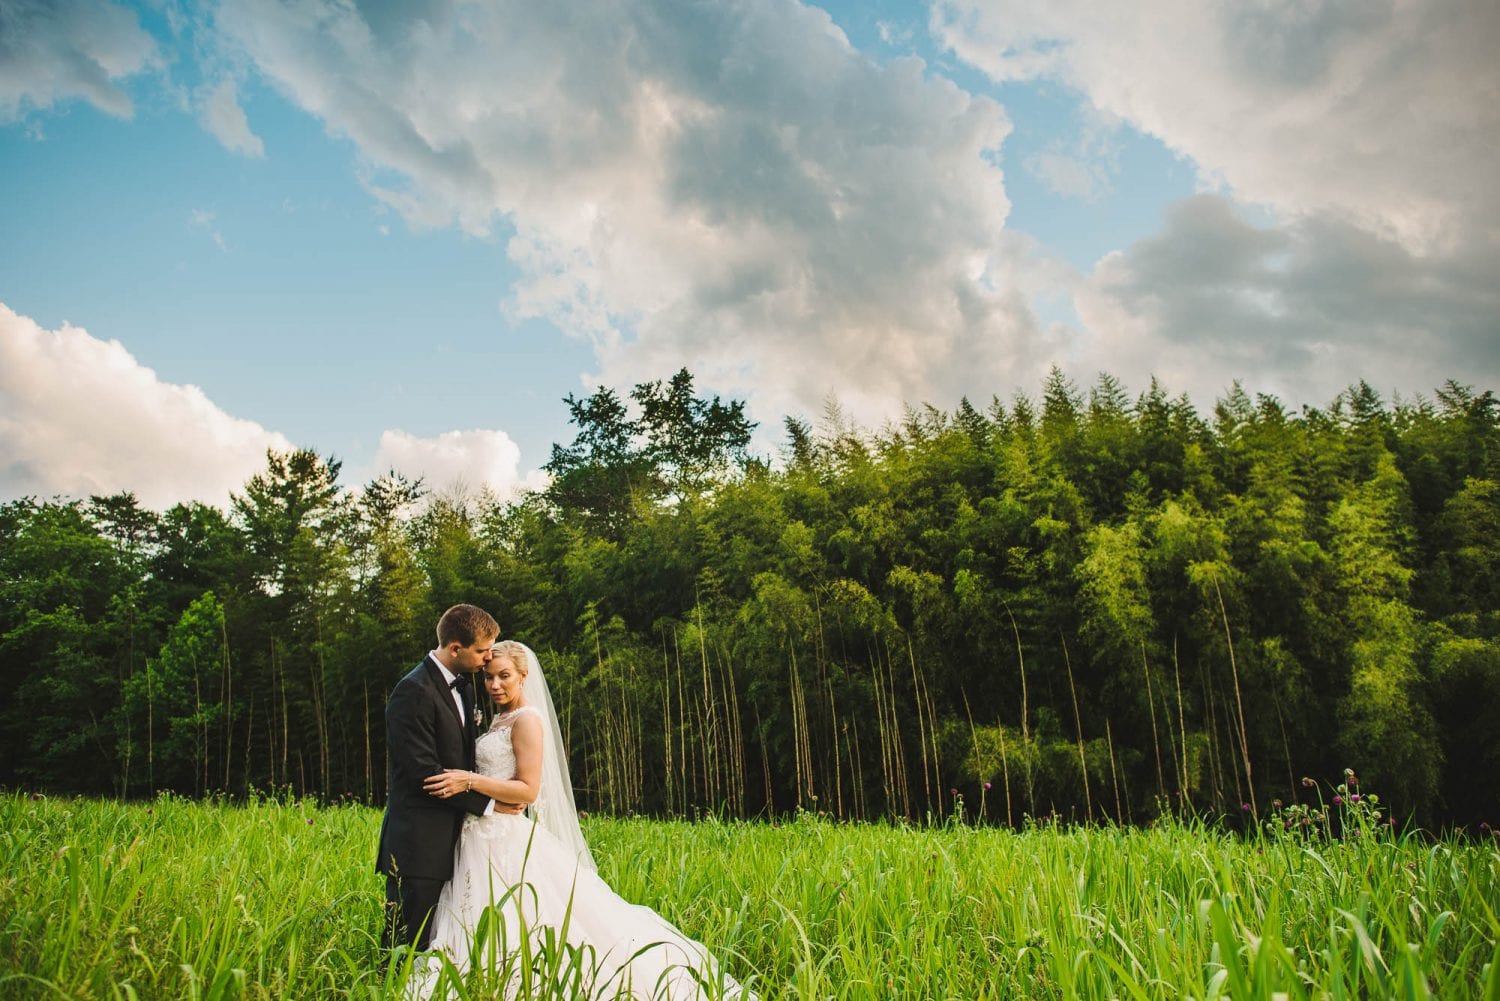 Wedding photography in a field with bamboo